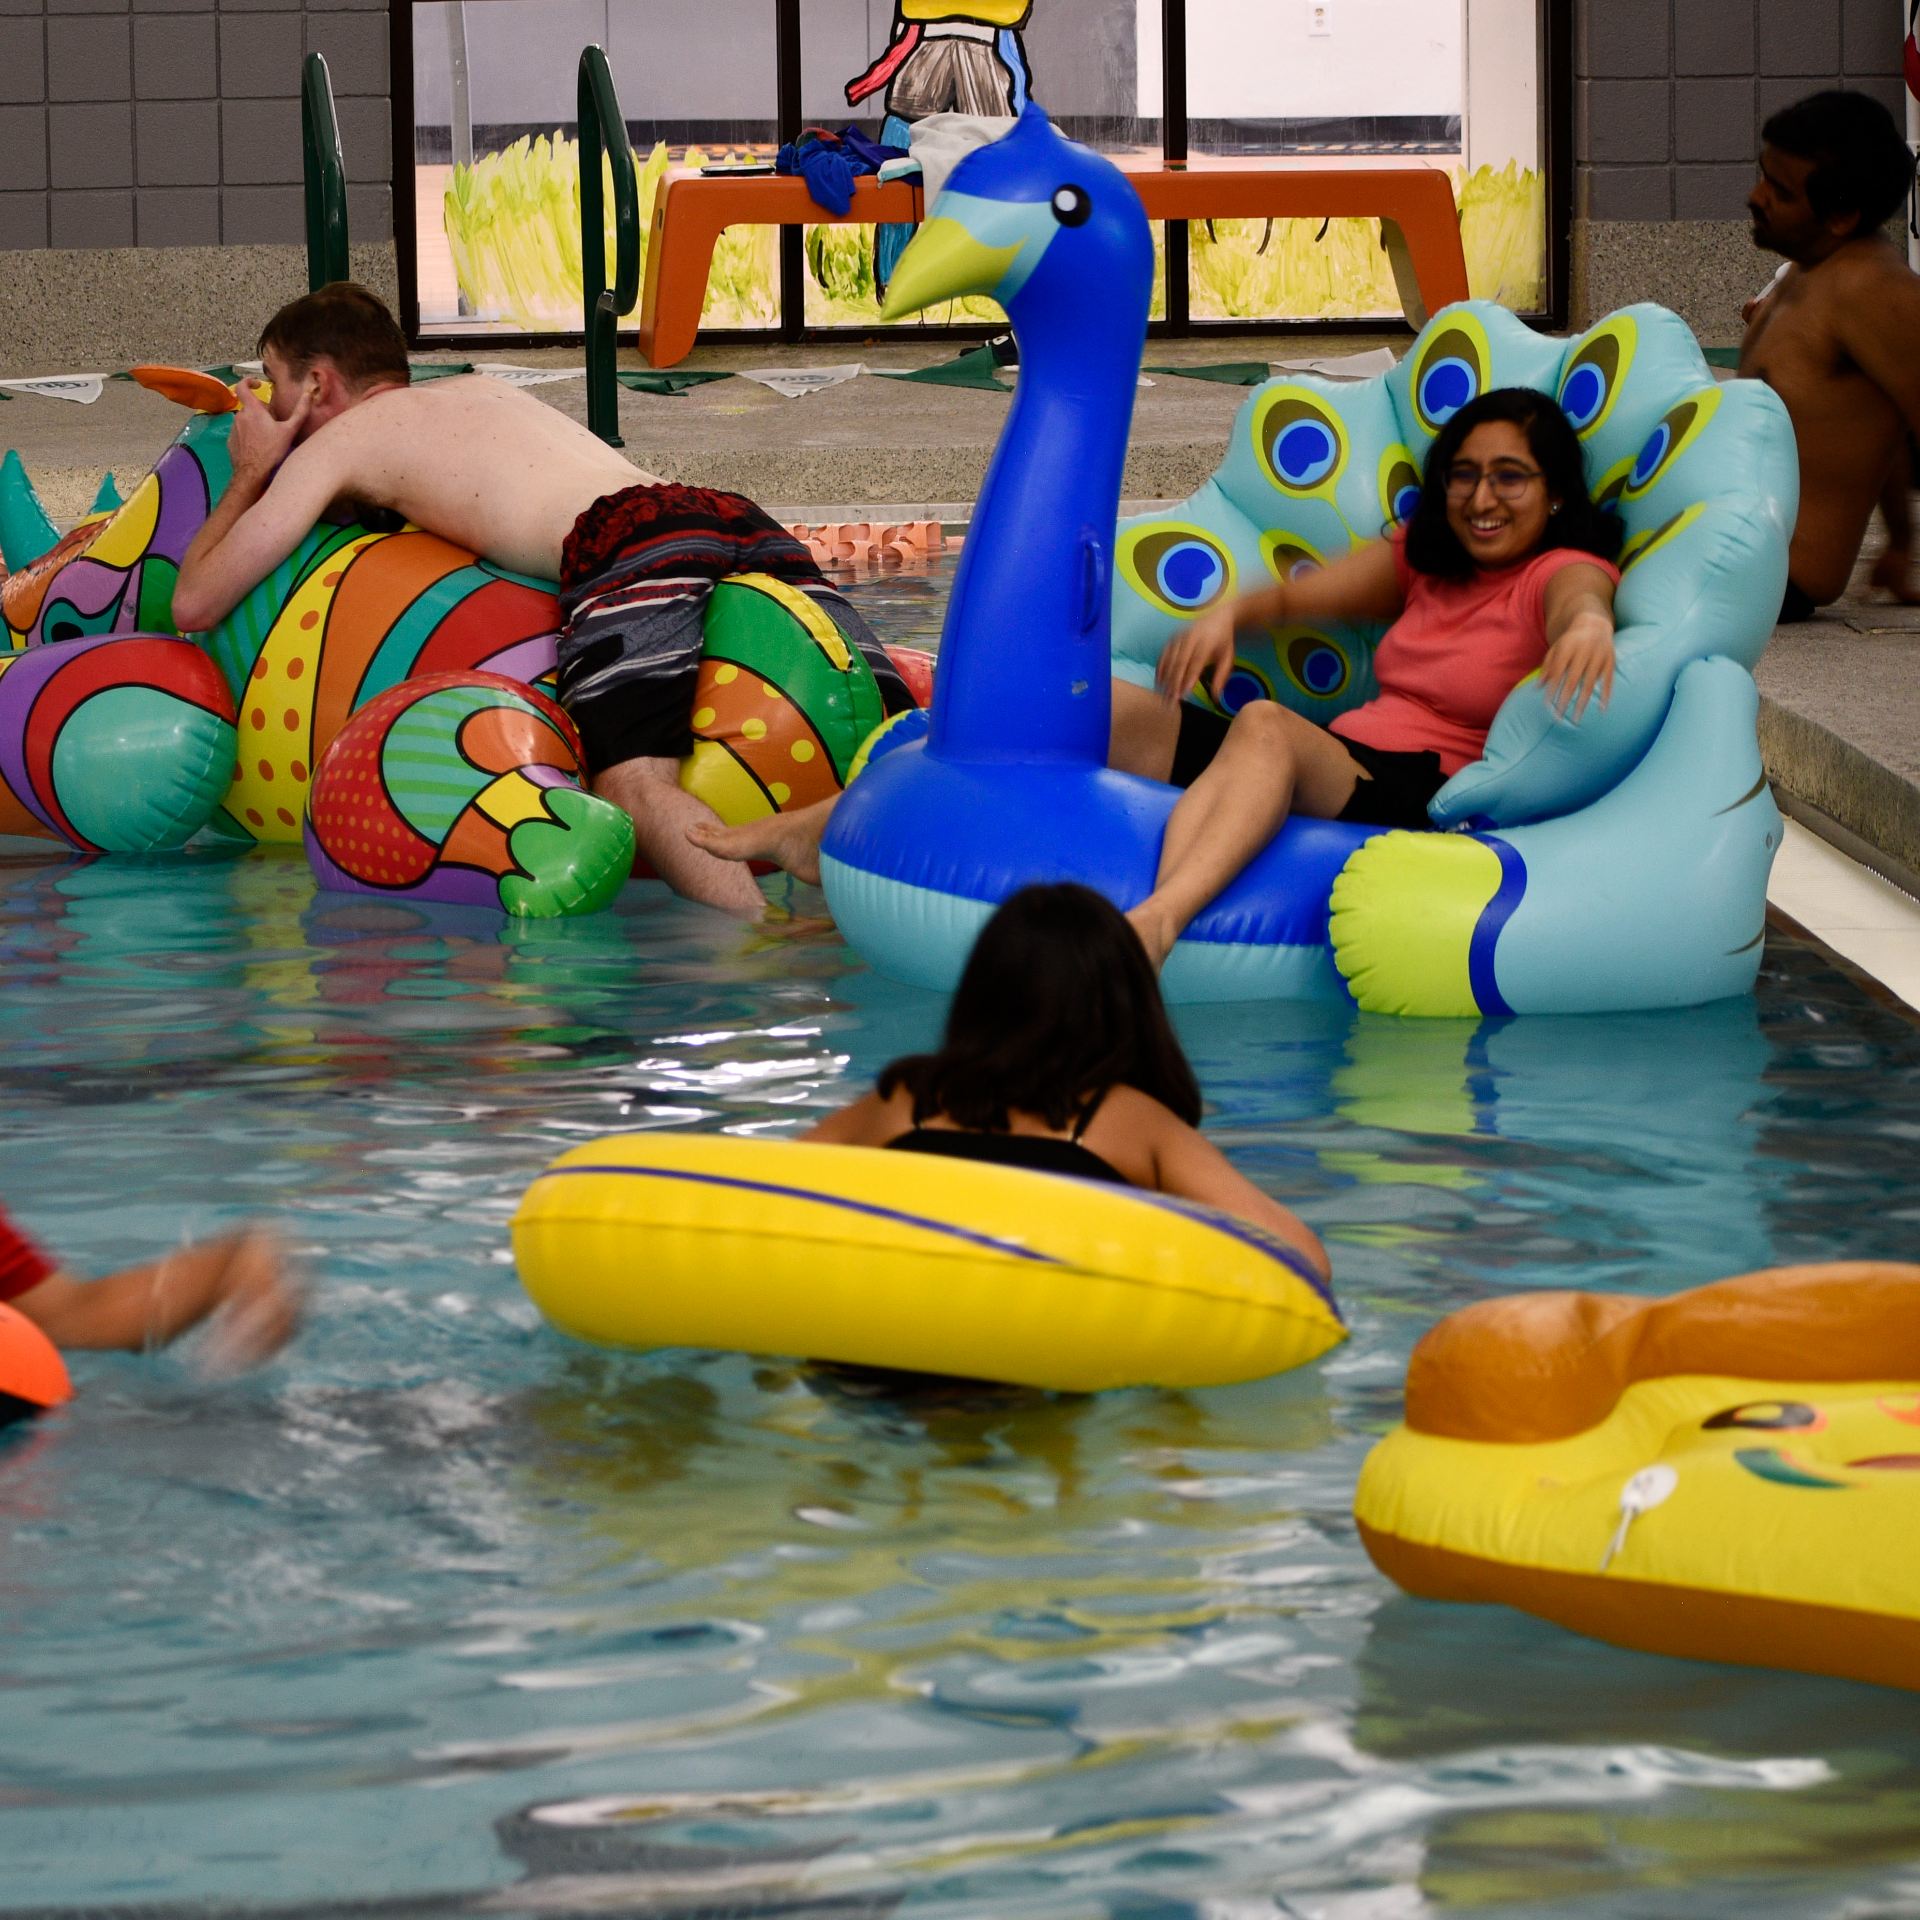 UT Dallas students lounge on pool inflatables in the activity center natatorium.  